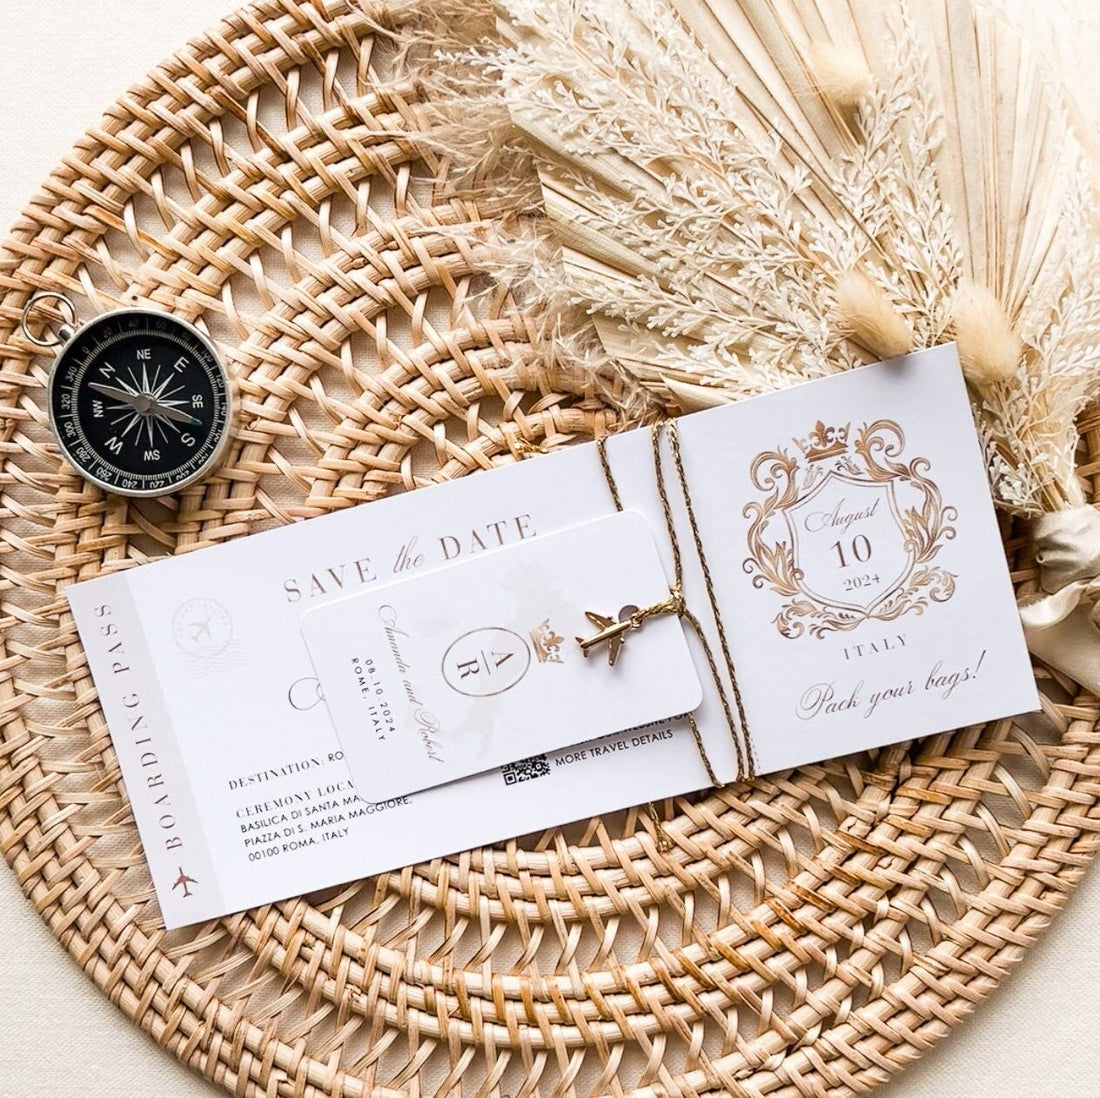 White & Gold Boarding Pass Save the Date Template